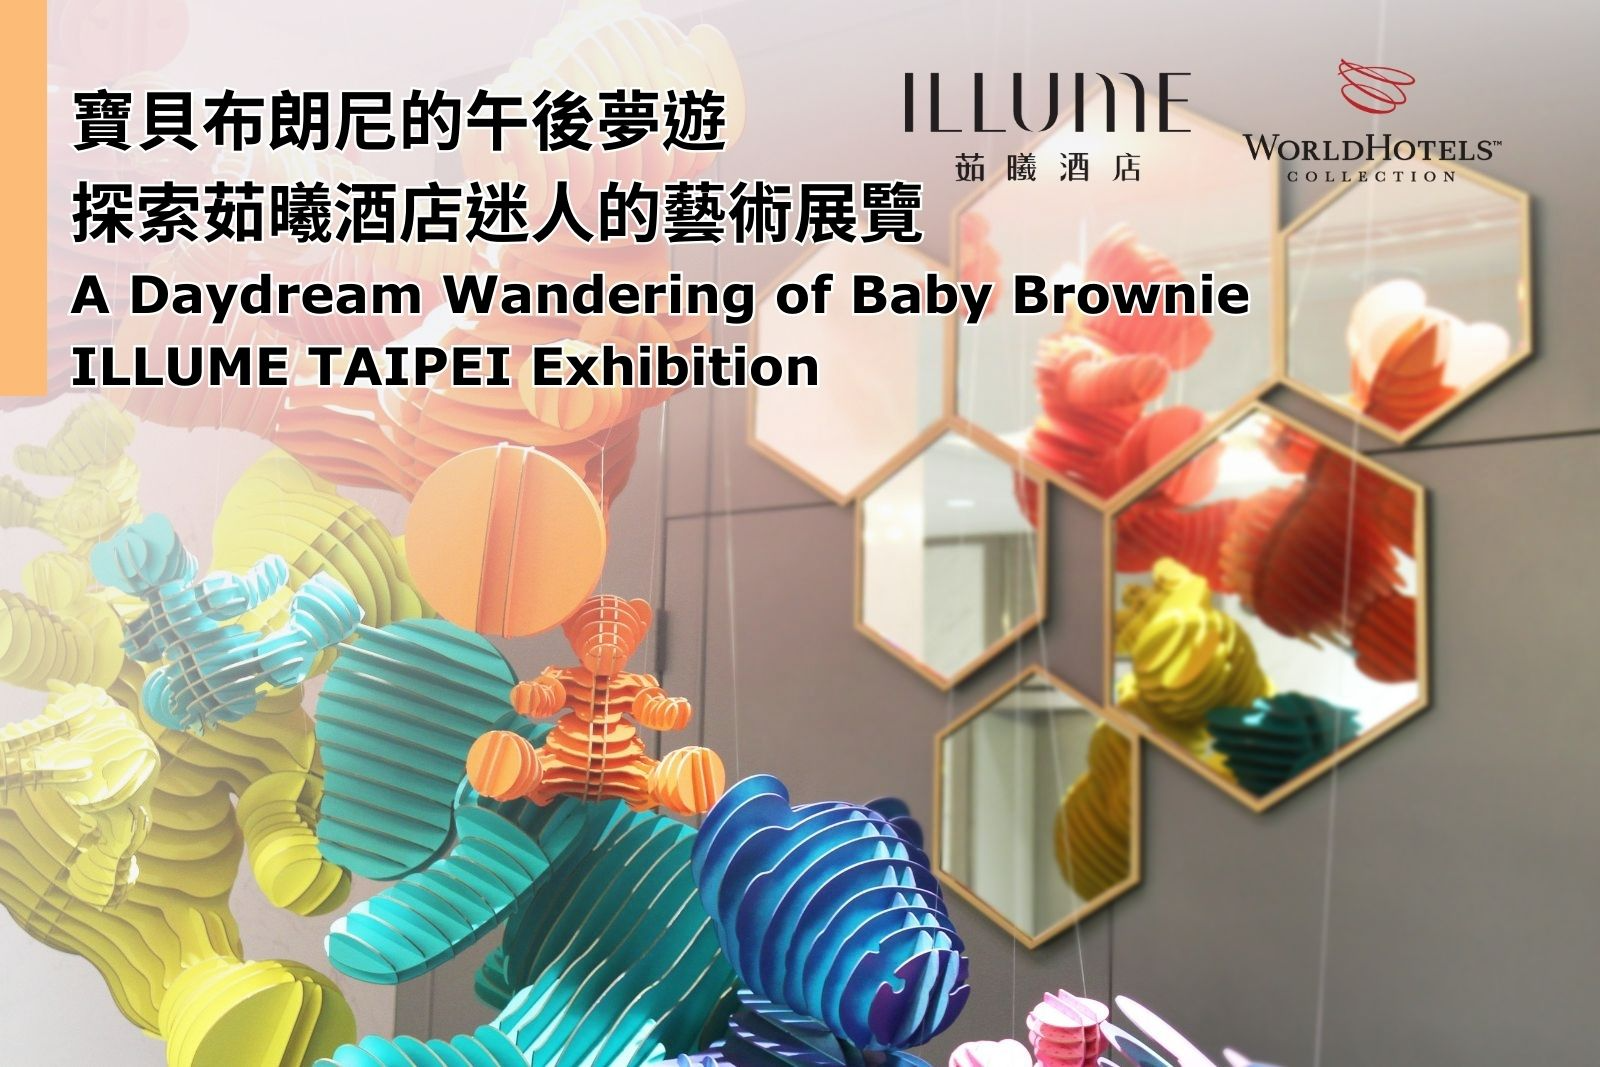 Explore the Enchanting “A Daydream Wandering of Baby Brownie” at ILLUME TAIPEI Exhibition